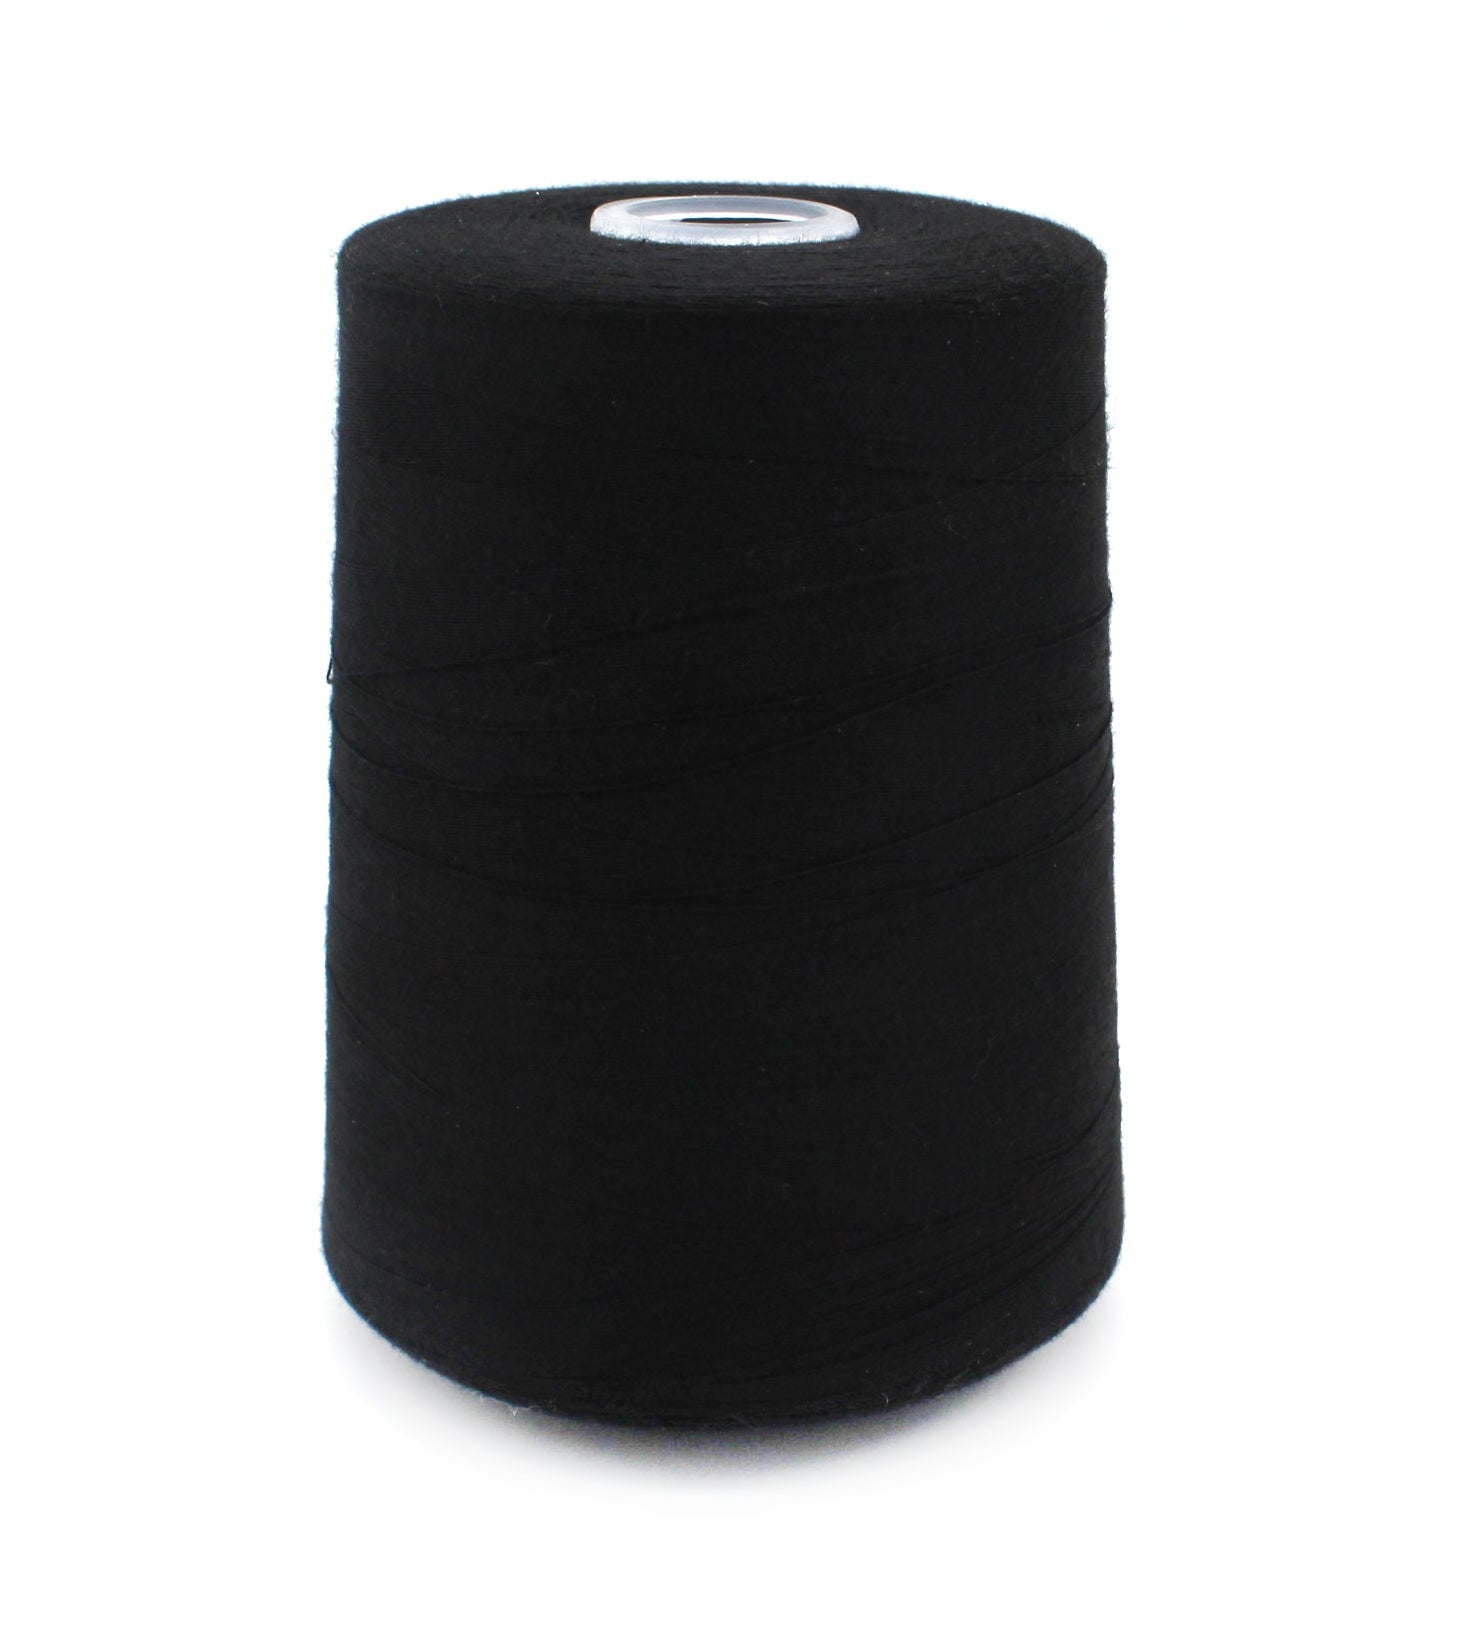 10 PCS Sewing Thread Cotton Black Cotton Thread 1000 Yards for